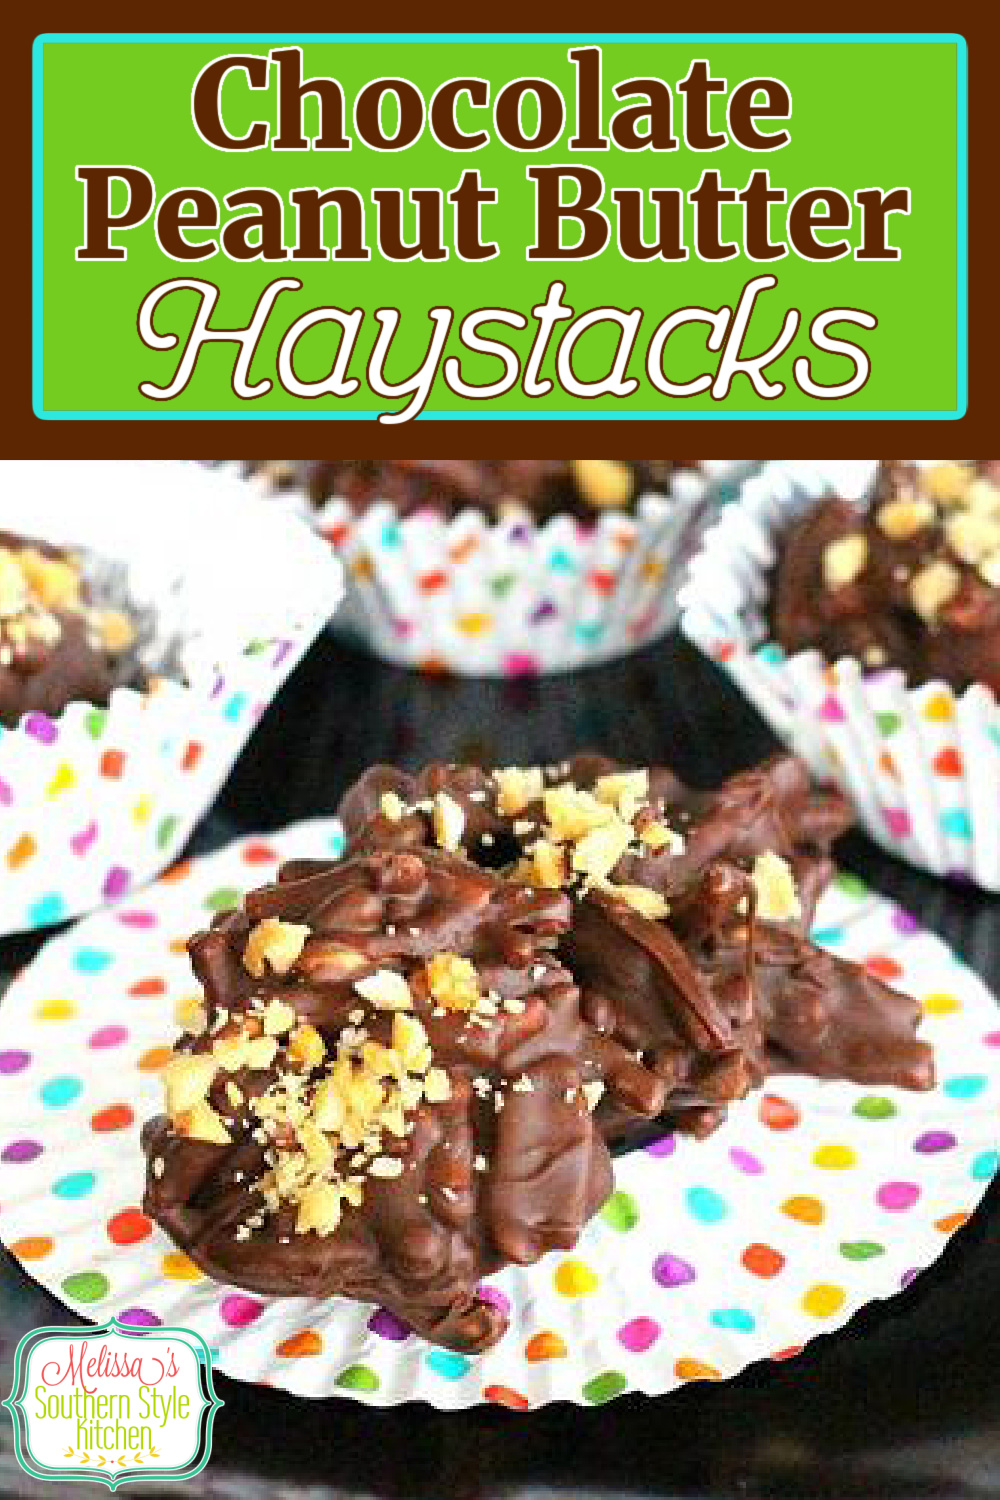 You can't stop at one when you're popping these easy chocolate peanut butter haystacks #chocolate #chocolatepeanutbuter #haystacks #chowmeinnoodles #candy #holidayrecipes #desserts #dessertfoodrecipes #christmas #easter #easycandyrecipes #southernfood #southernrecipes #desserts #christmascandy via @melissasssk